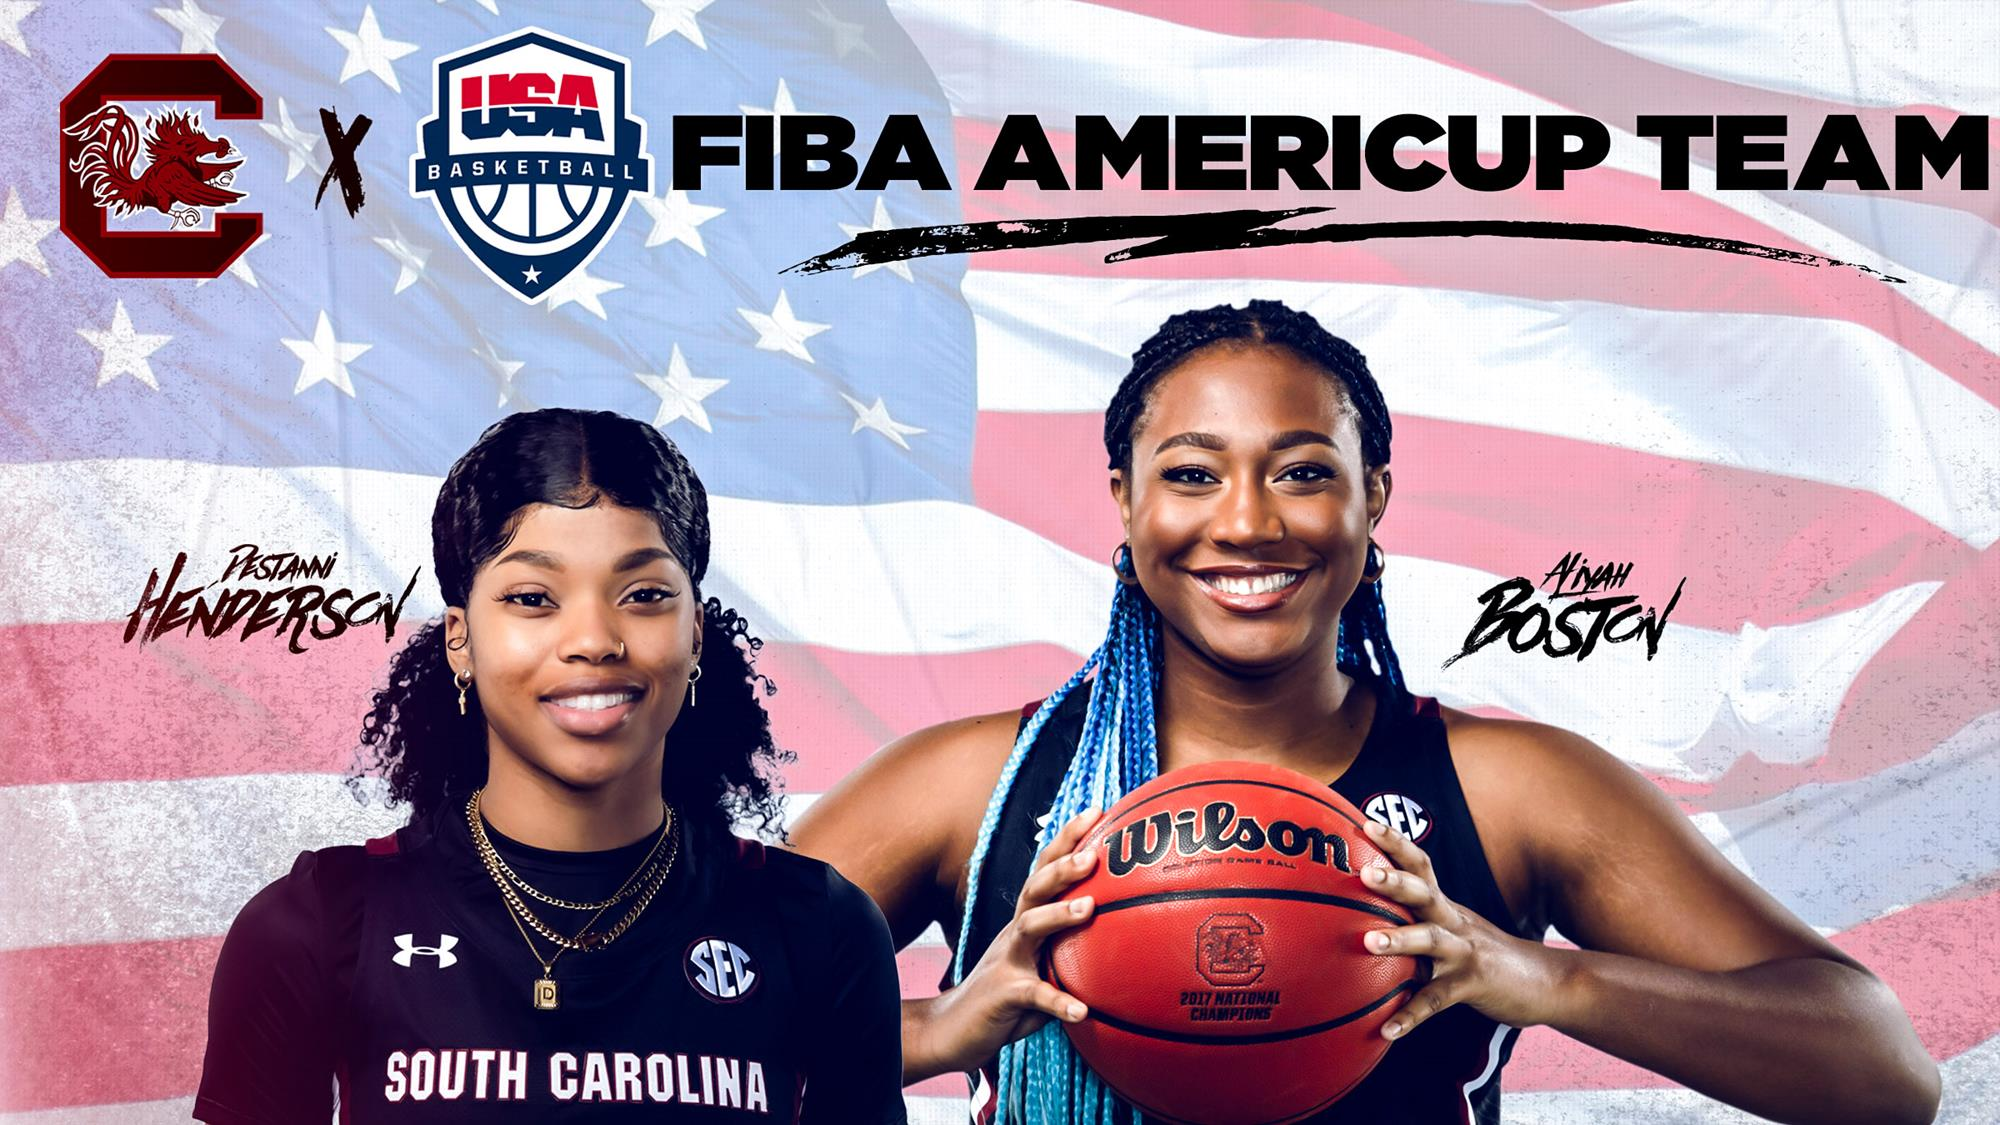 Boston, Henderson Named to USA AmeriCup Team